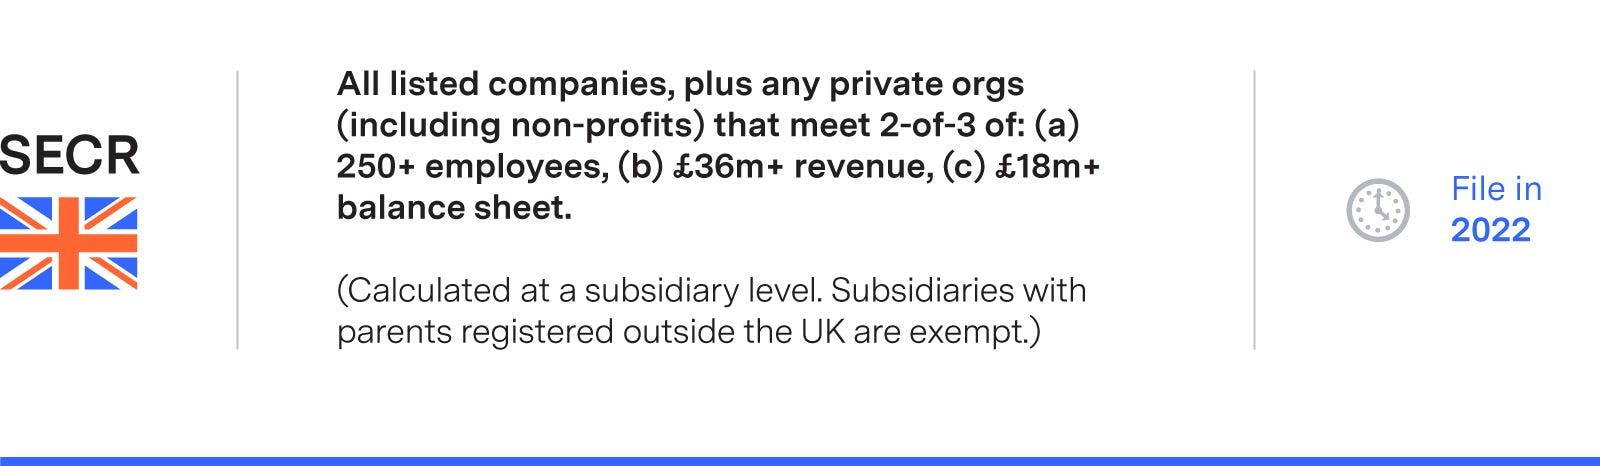 SECR Requirements: All listed companies, plus any private orgs (including non-profits) that meet 2-of-3 of: (a) 250+ employees, (b) £36m+ revenue, (c) £18+ balance sheet. File in 2022.